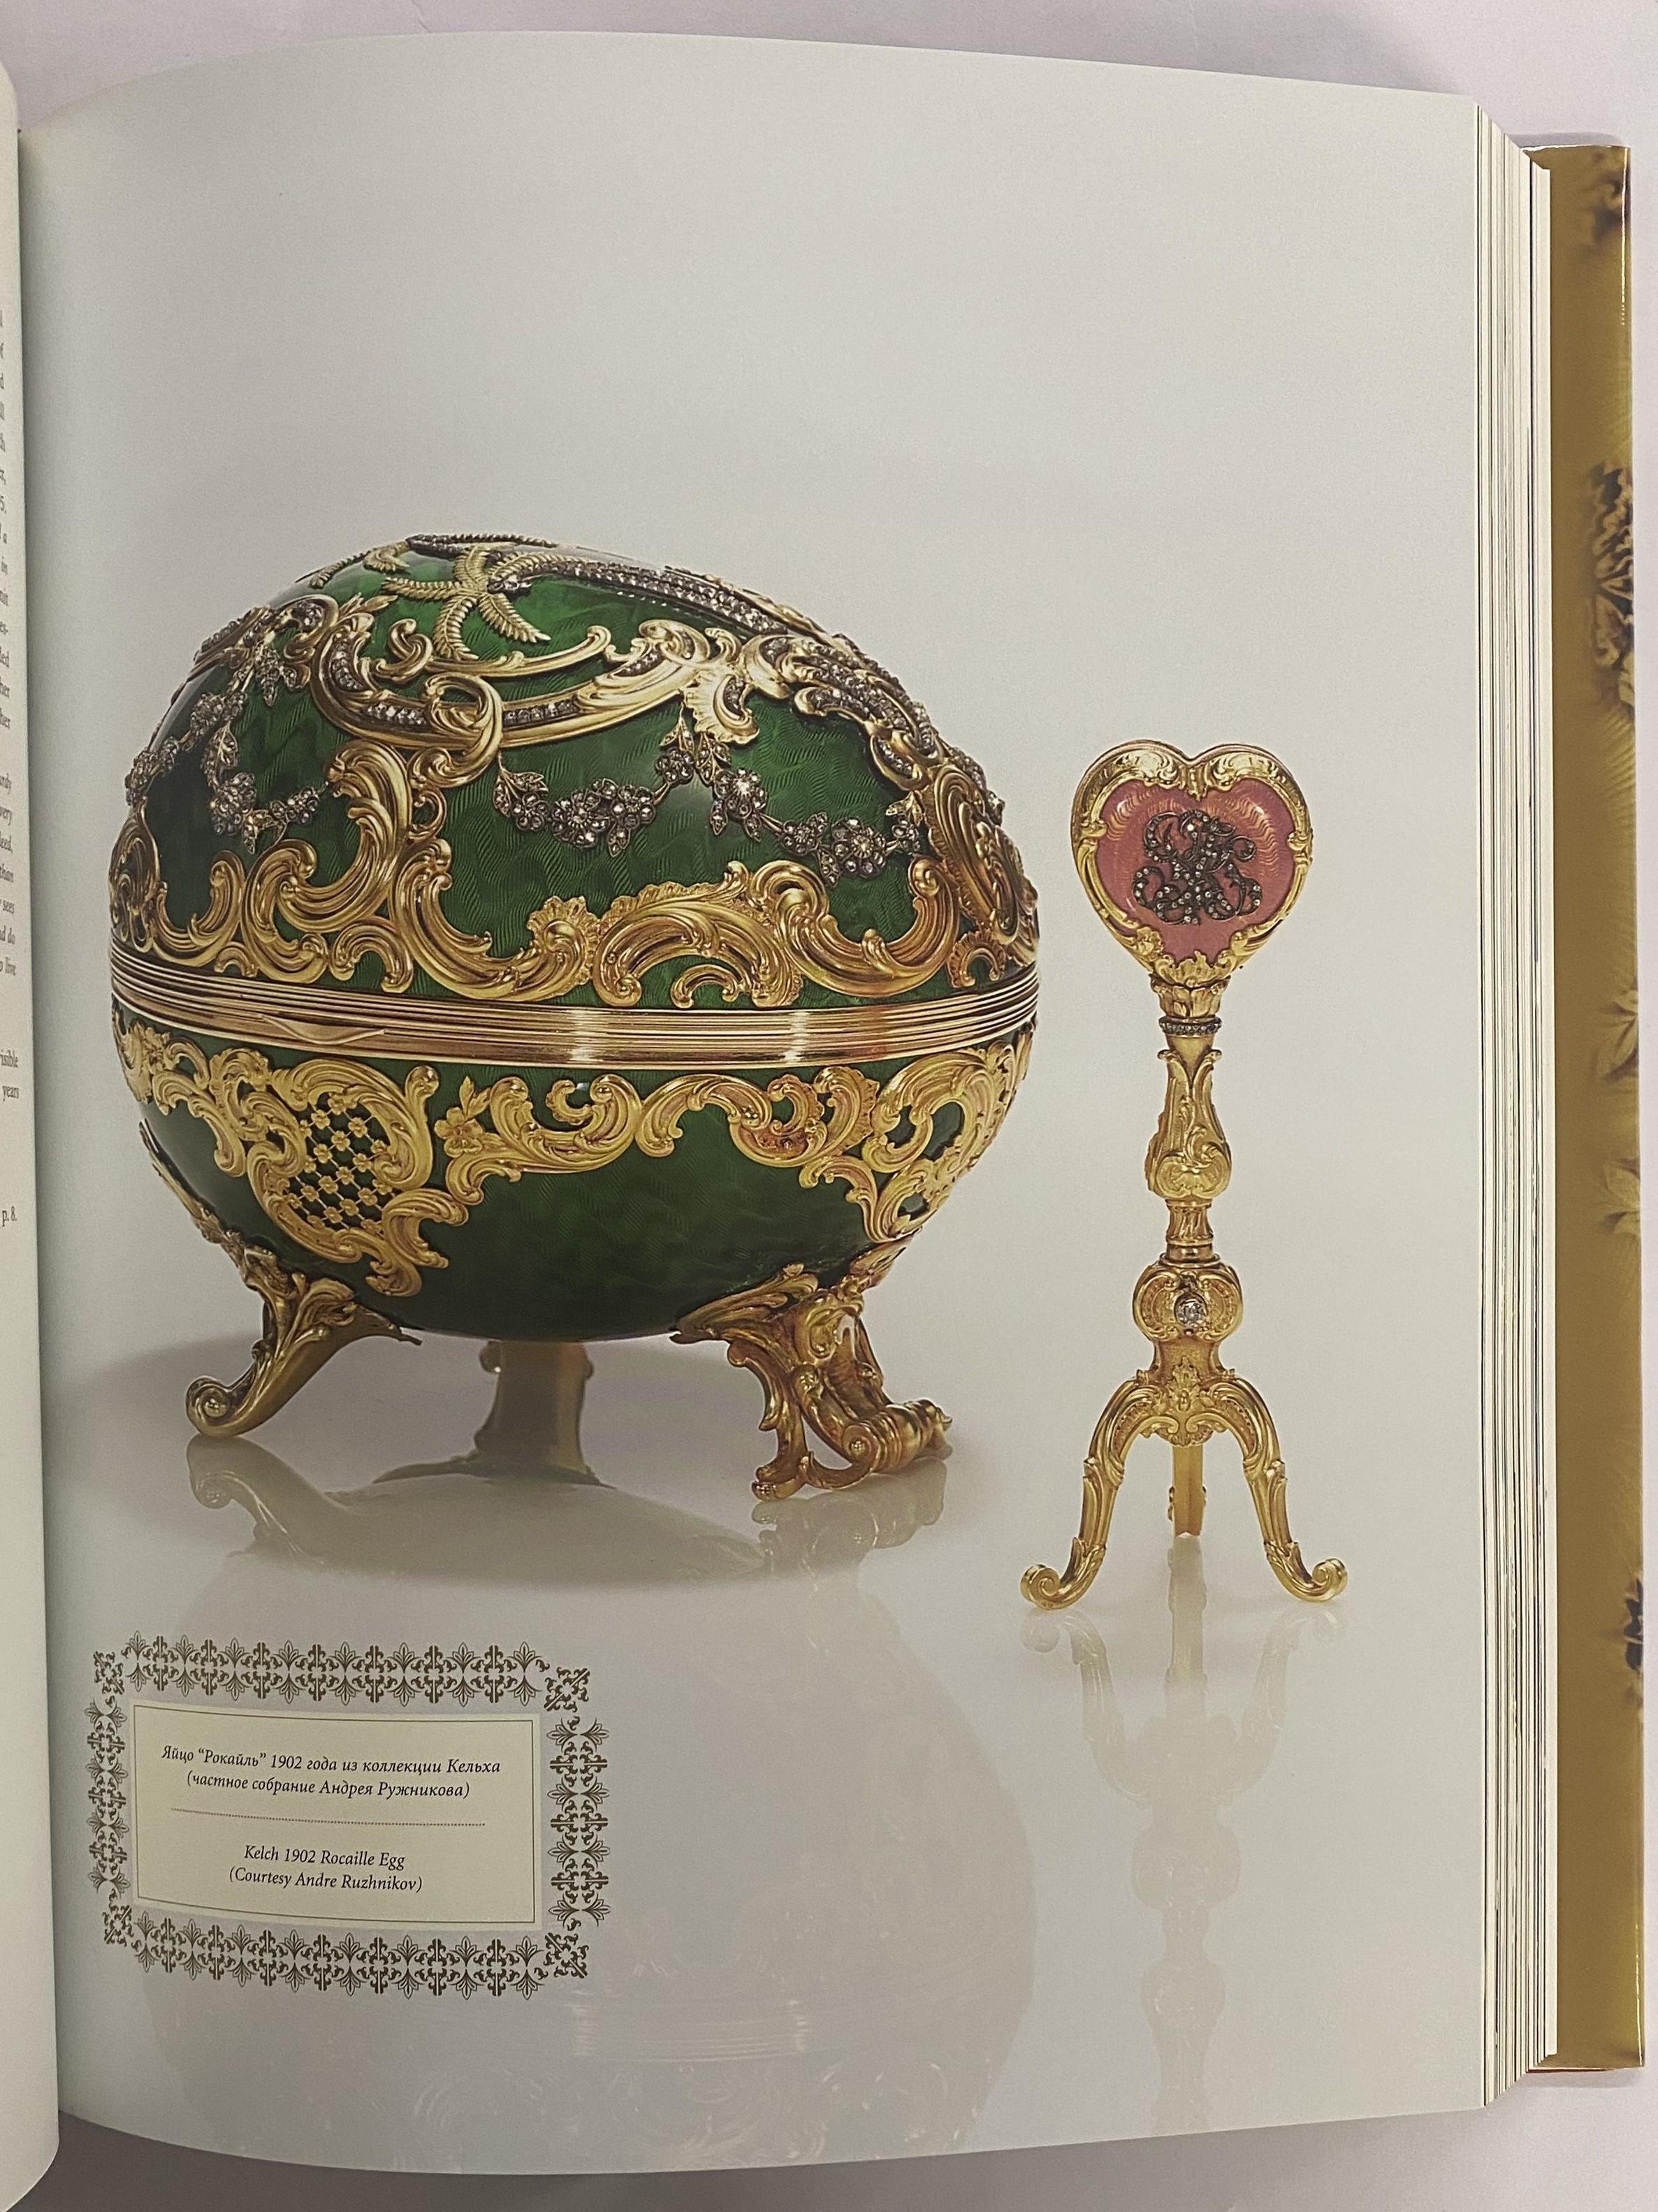 Faberge: Treasures of Imperial Russia by Geza von Habsburg (Book) For Sale 4